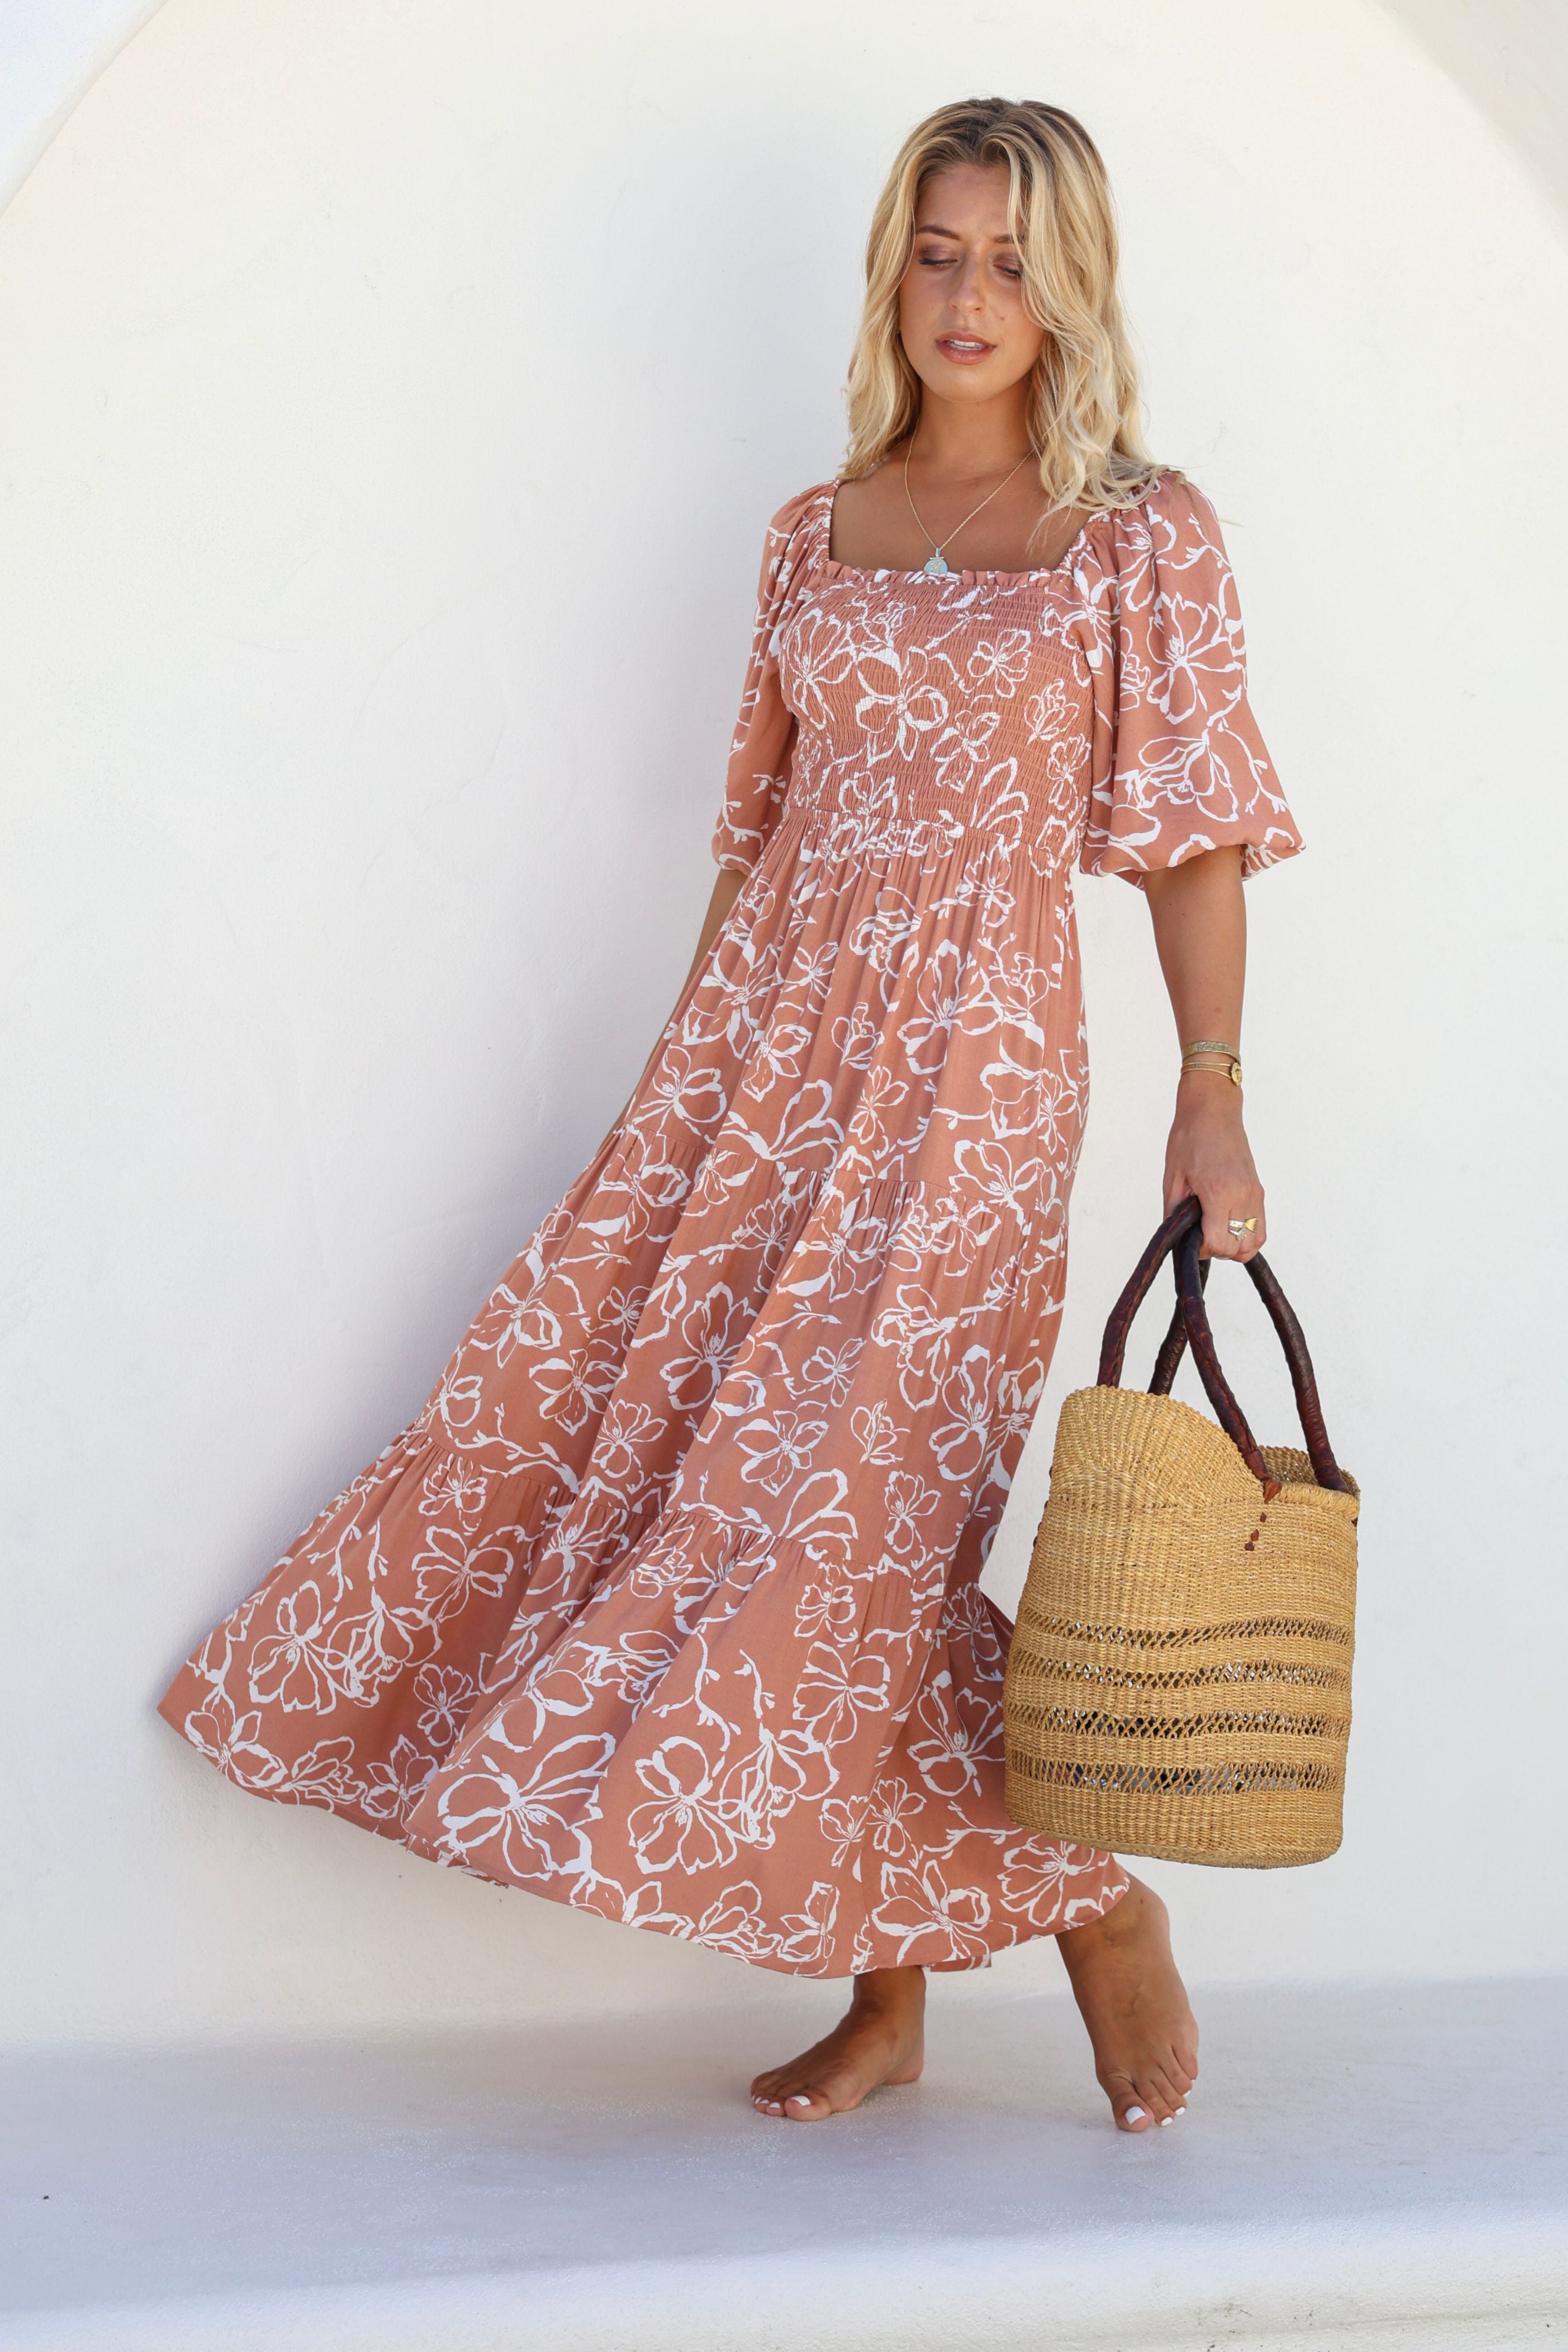 Morocco Maxi Dress in Tan and White